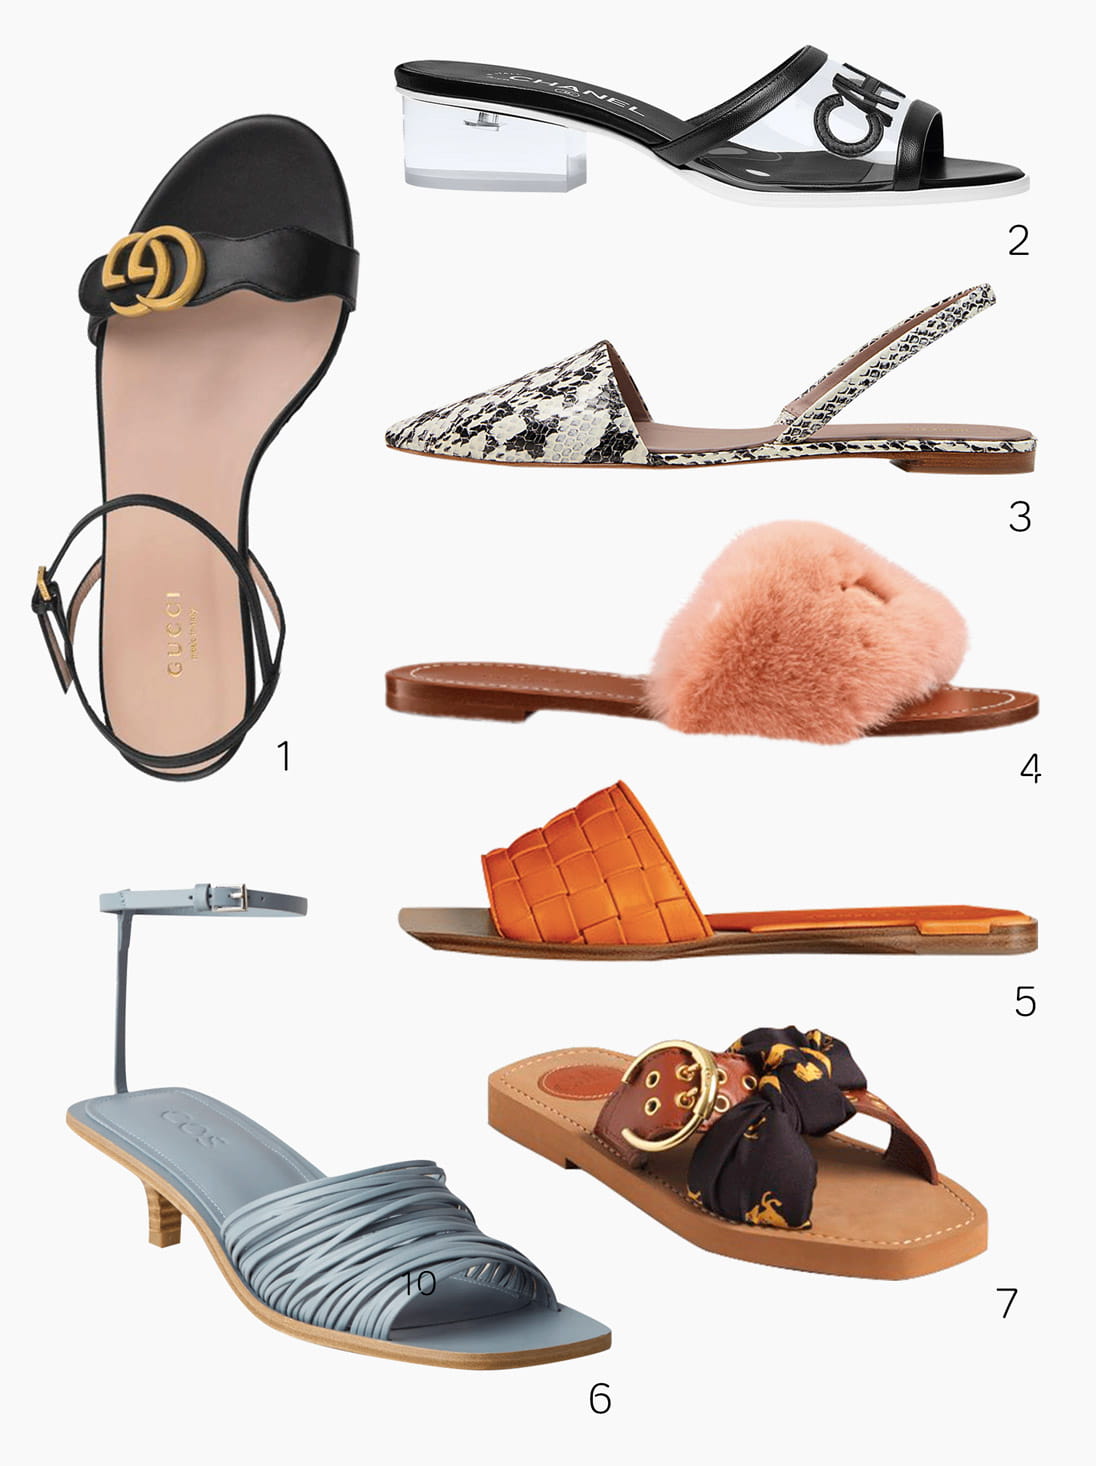 The Style Sheet’s guest editor, fashion consultant Chloe Mak, curates the summer’s best sandals